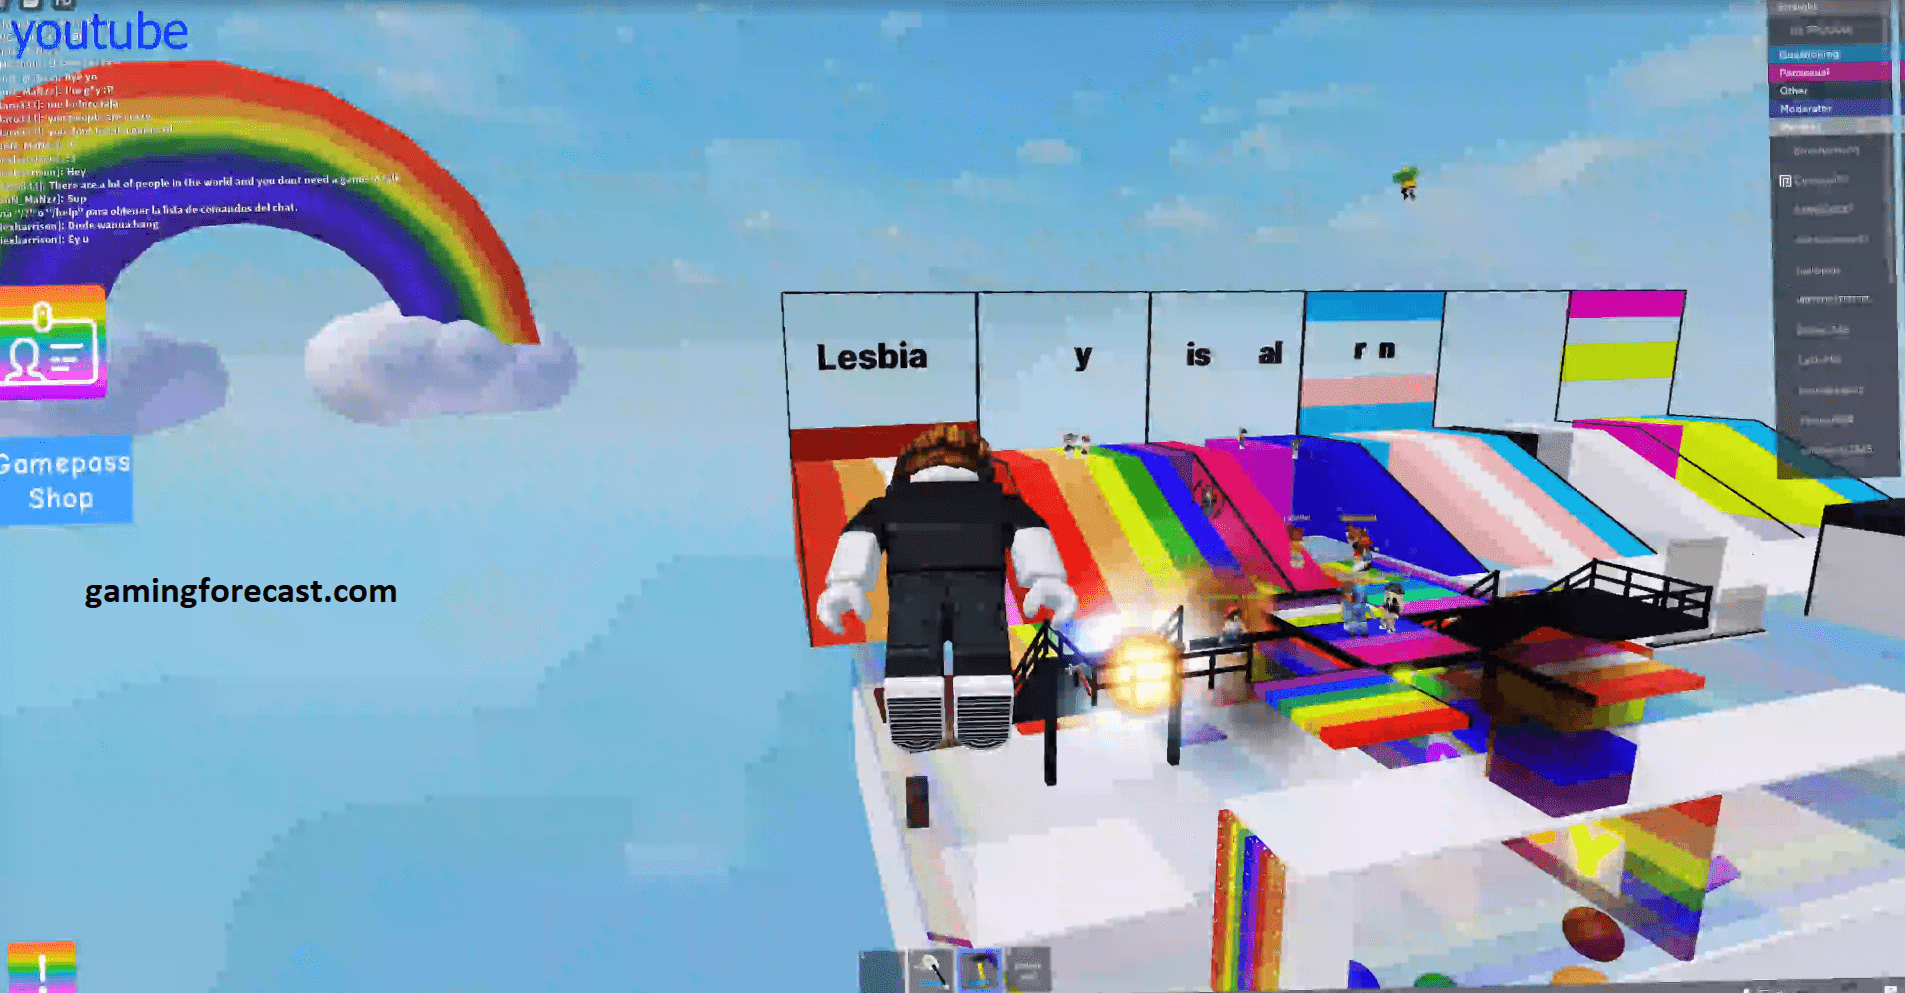 Roblox Hack Download Pc Destroy Lobby Fly Aimbot Scripts 2021 Gaming Forecast Download Free Online Game Hacks - roblox team create exploit